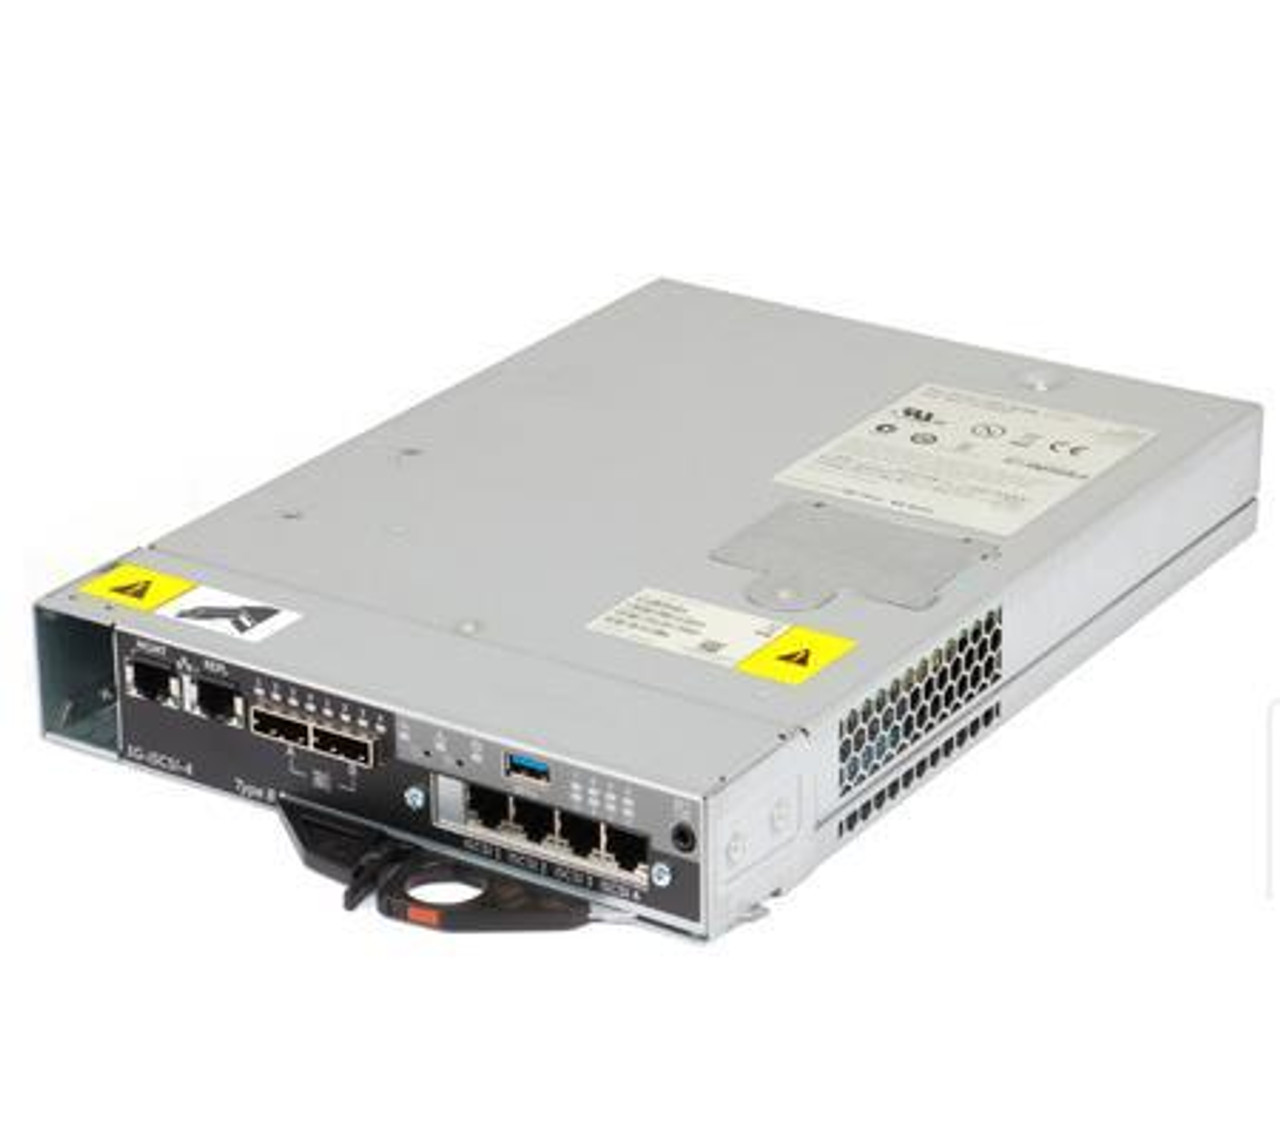 Dell 12Gbps SAS Controller with 4GB Cache for MD3400 MD3420 FW 08.20.12.6